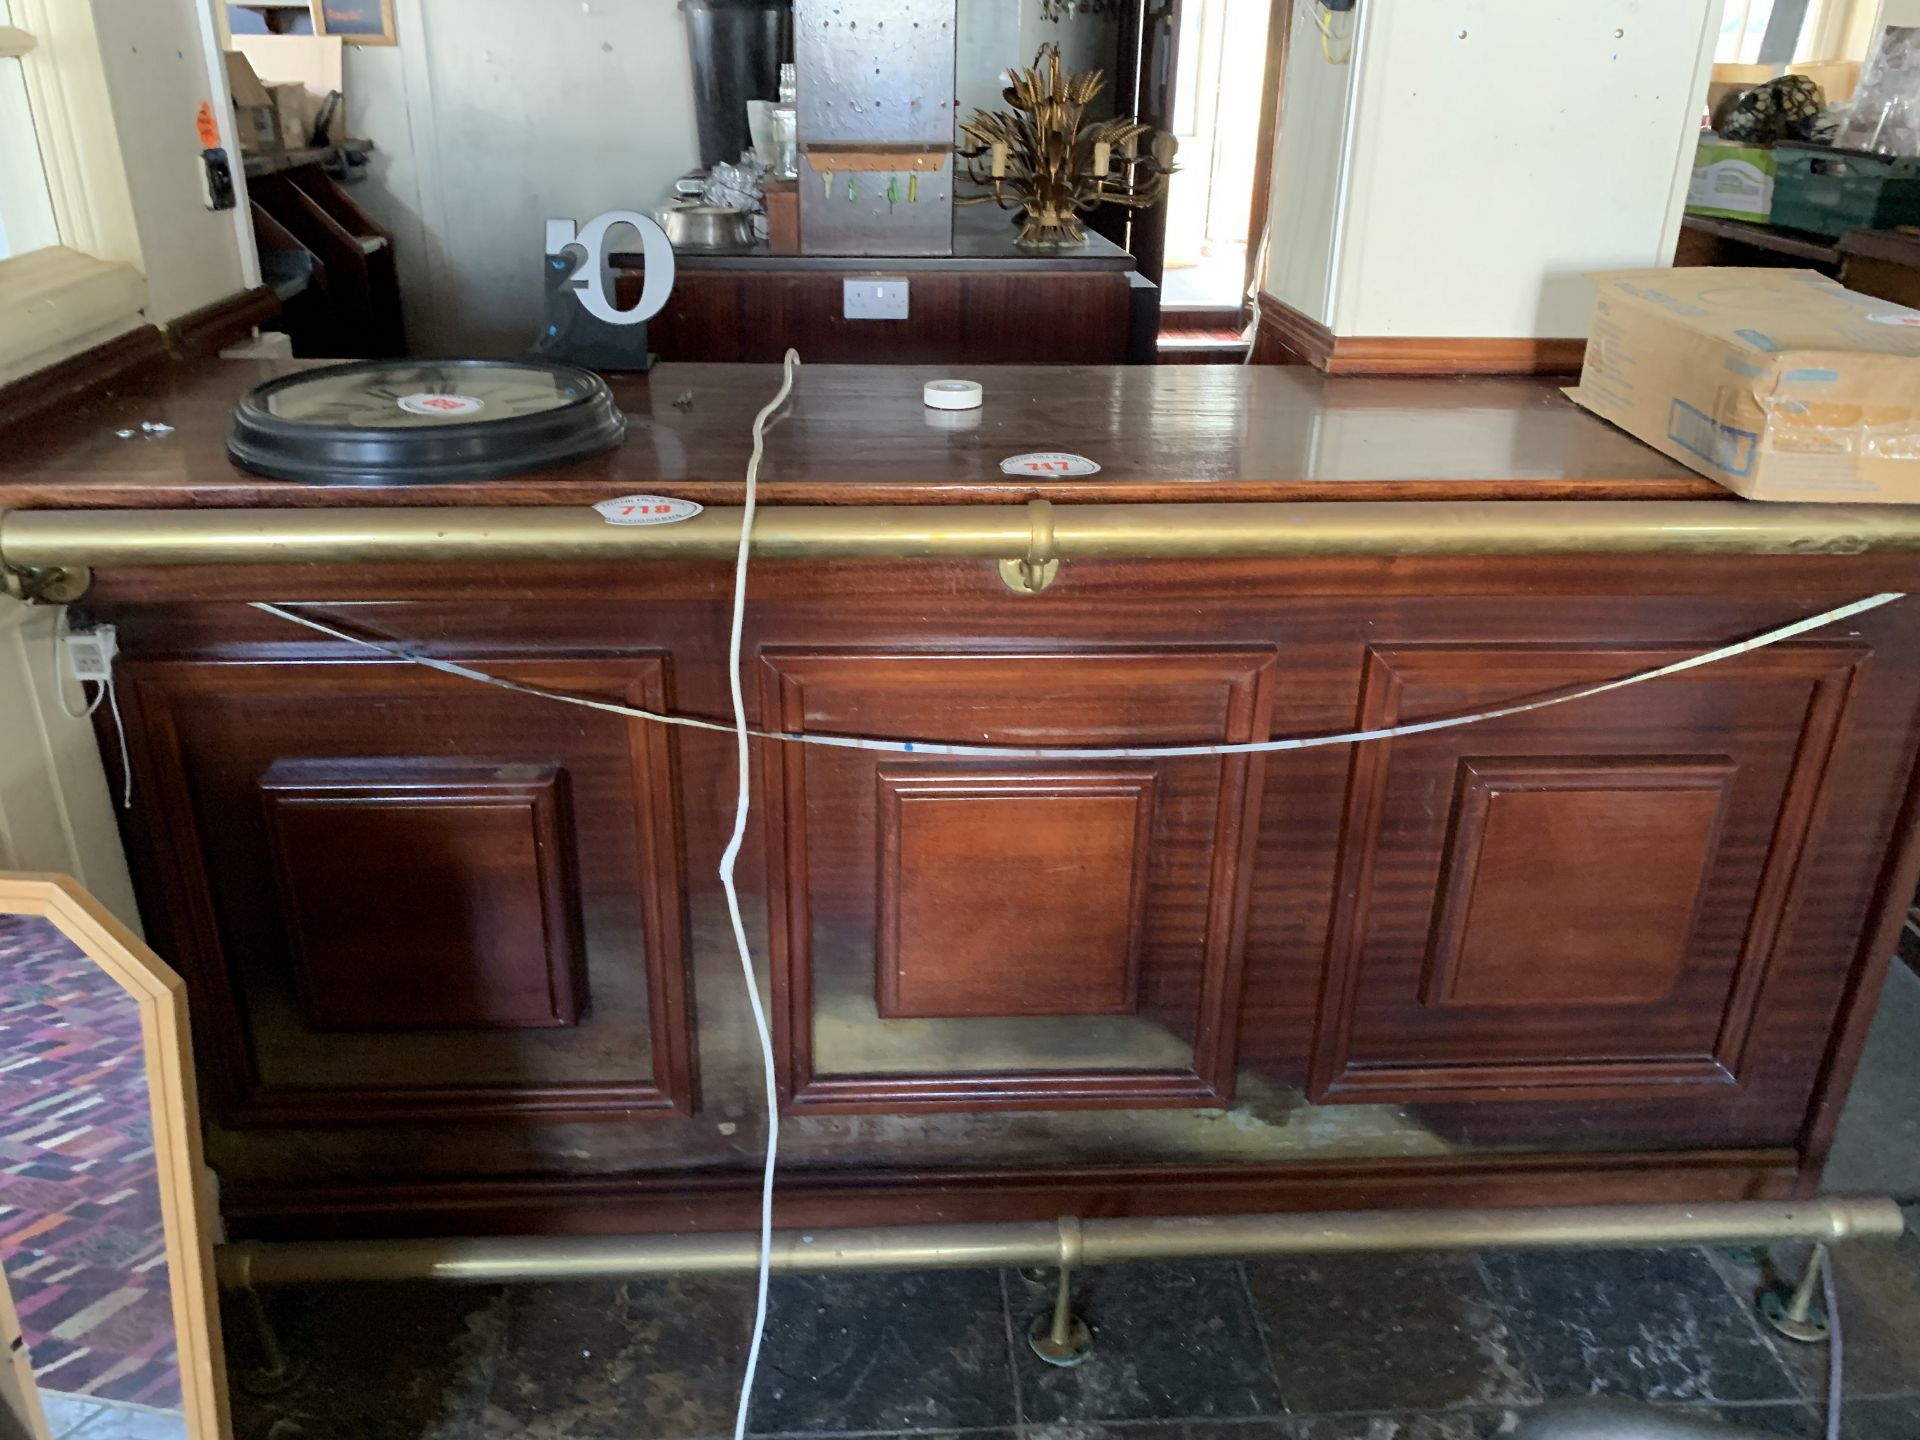 Wooden bar, 210 cm, not rail - purchaser to remove